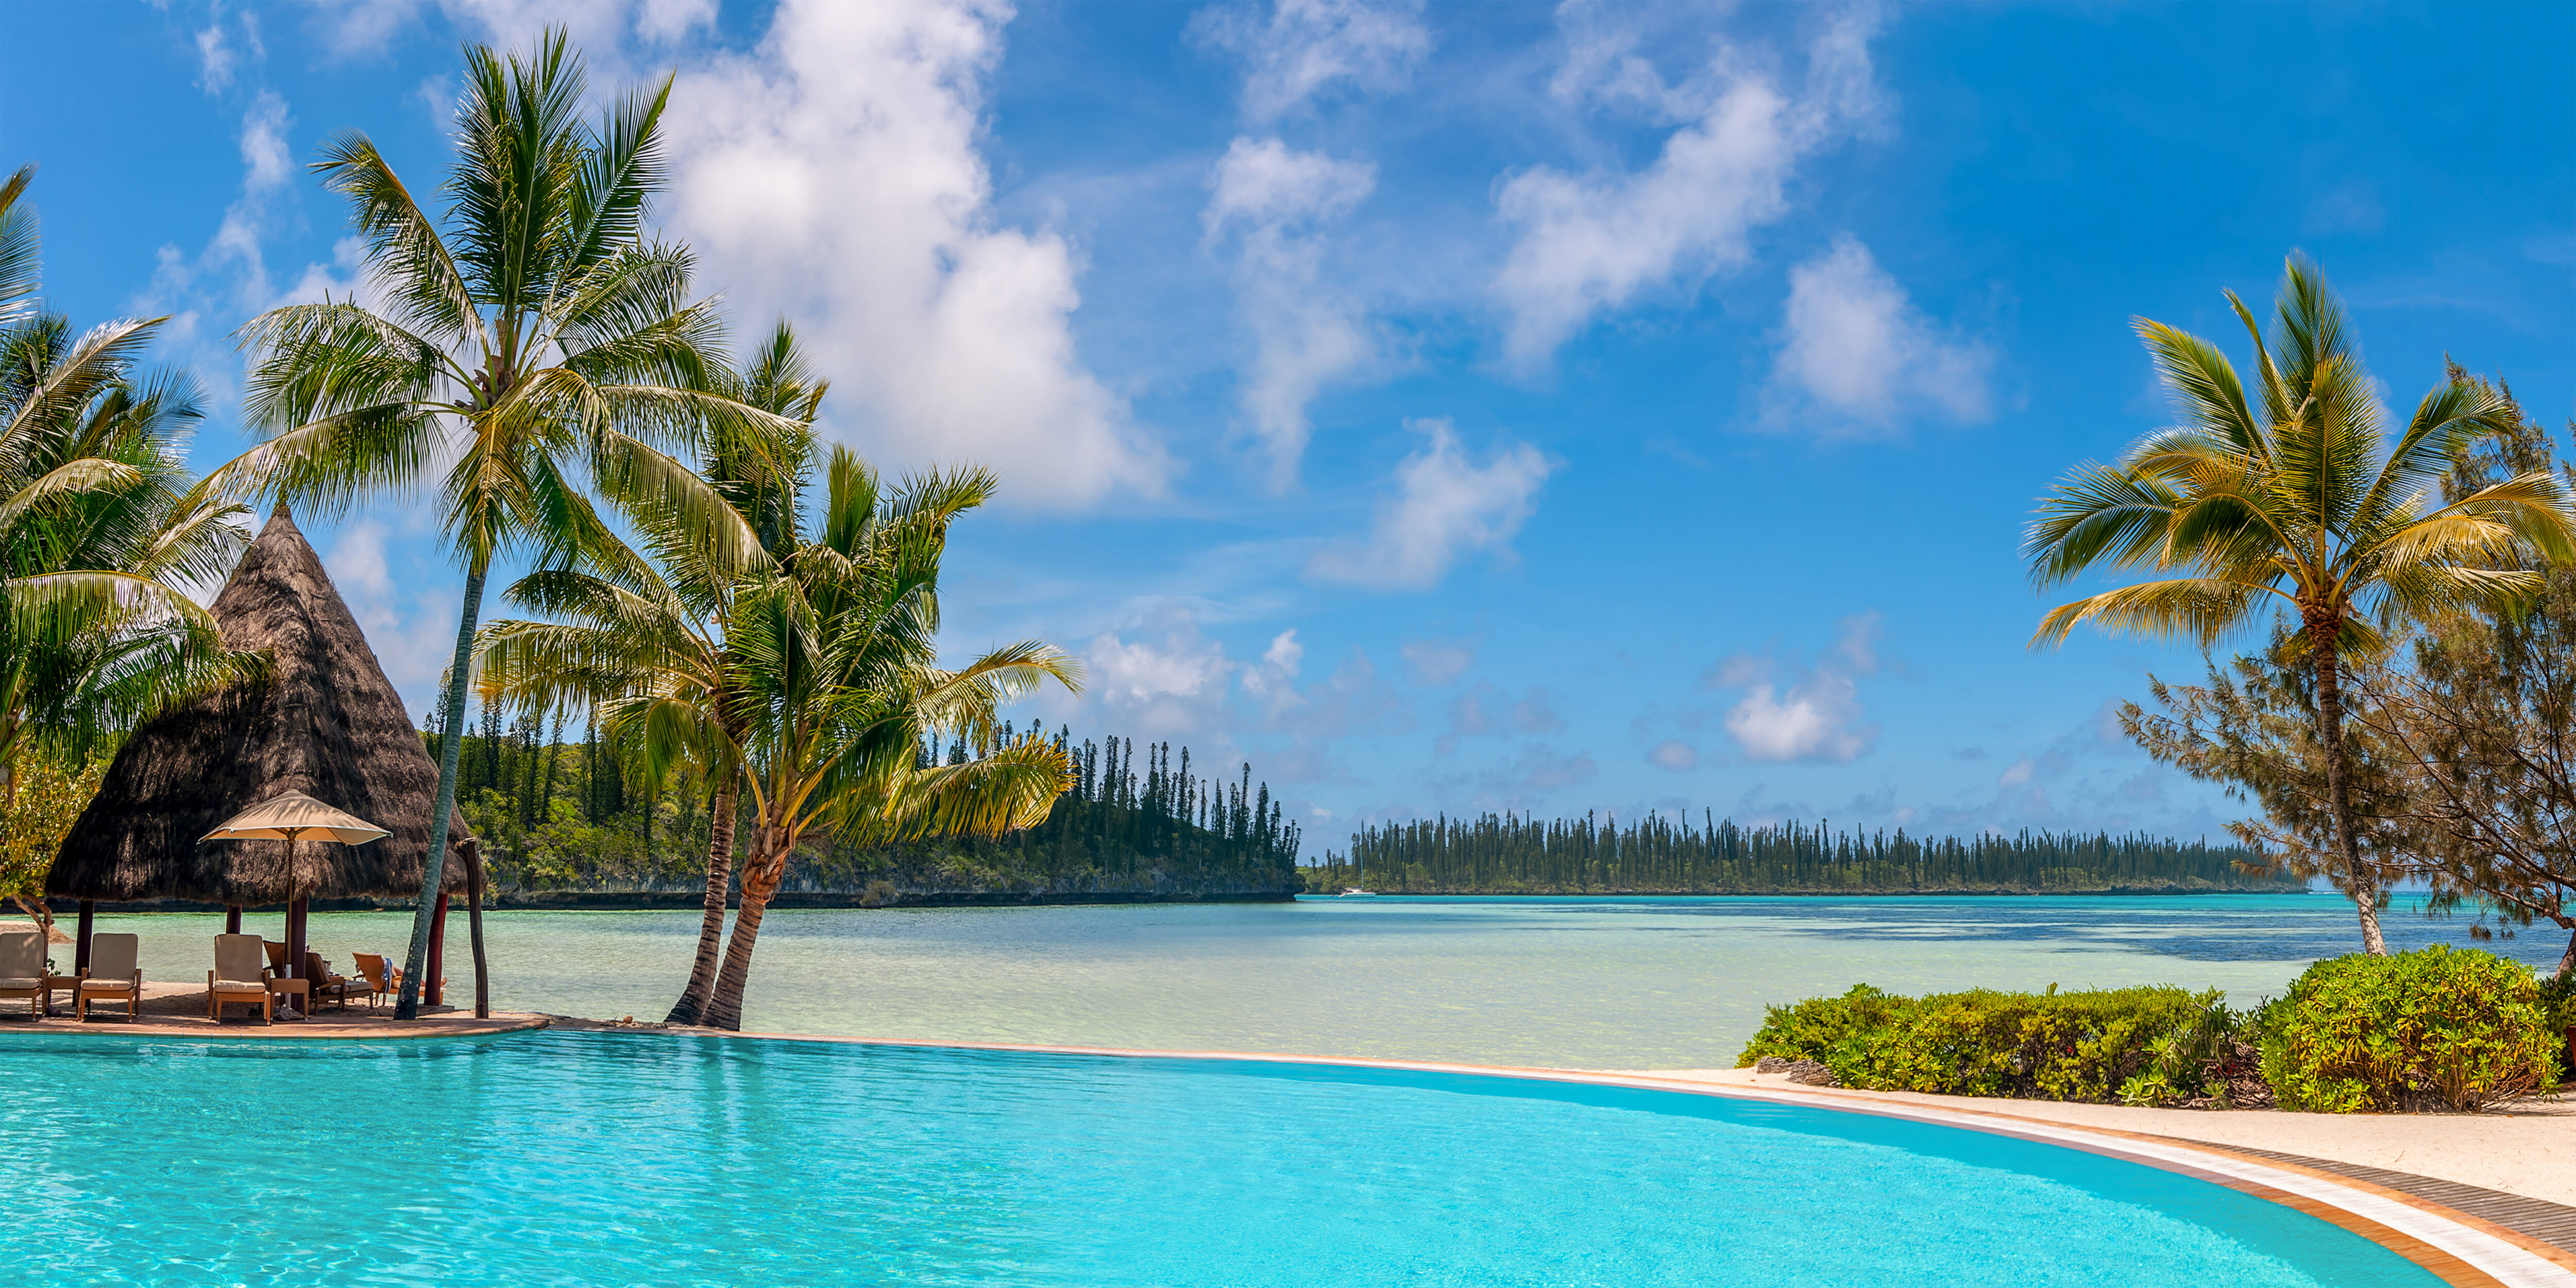 Where to Stay in New Caledonia